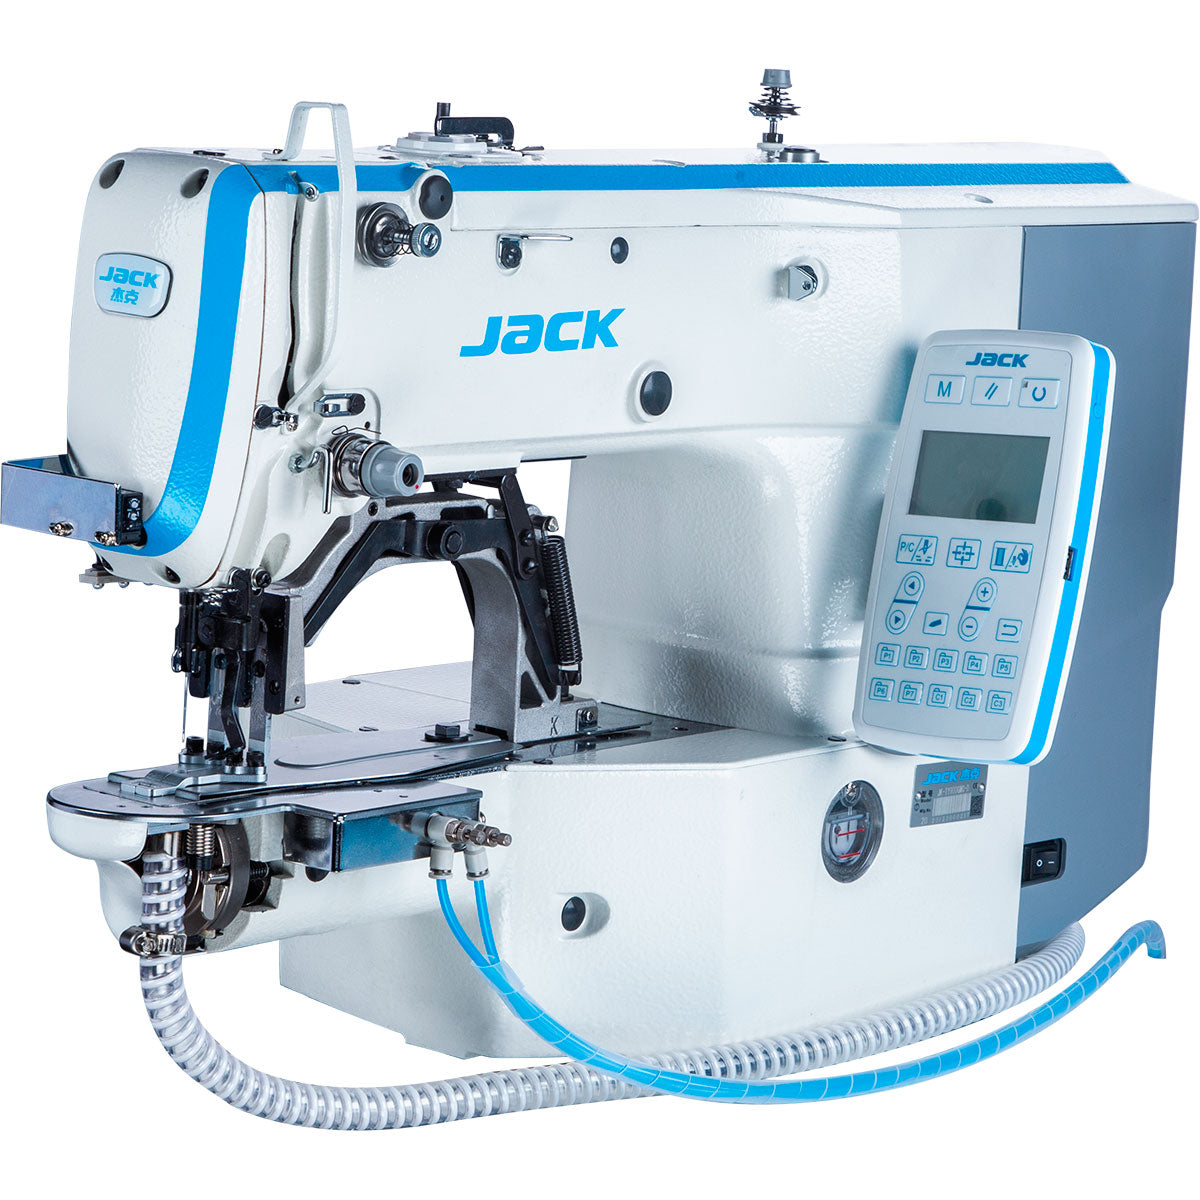 JACK JK-T1906GS-D Computer-Controlled High-Speed Shape-Tacking Industrial Sewing Machine Assembled with Table and Stand Included